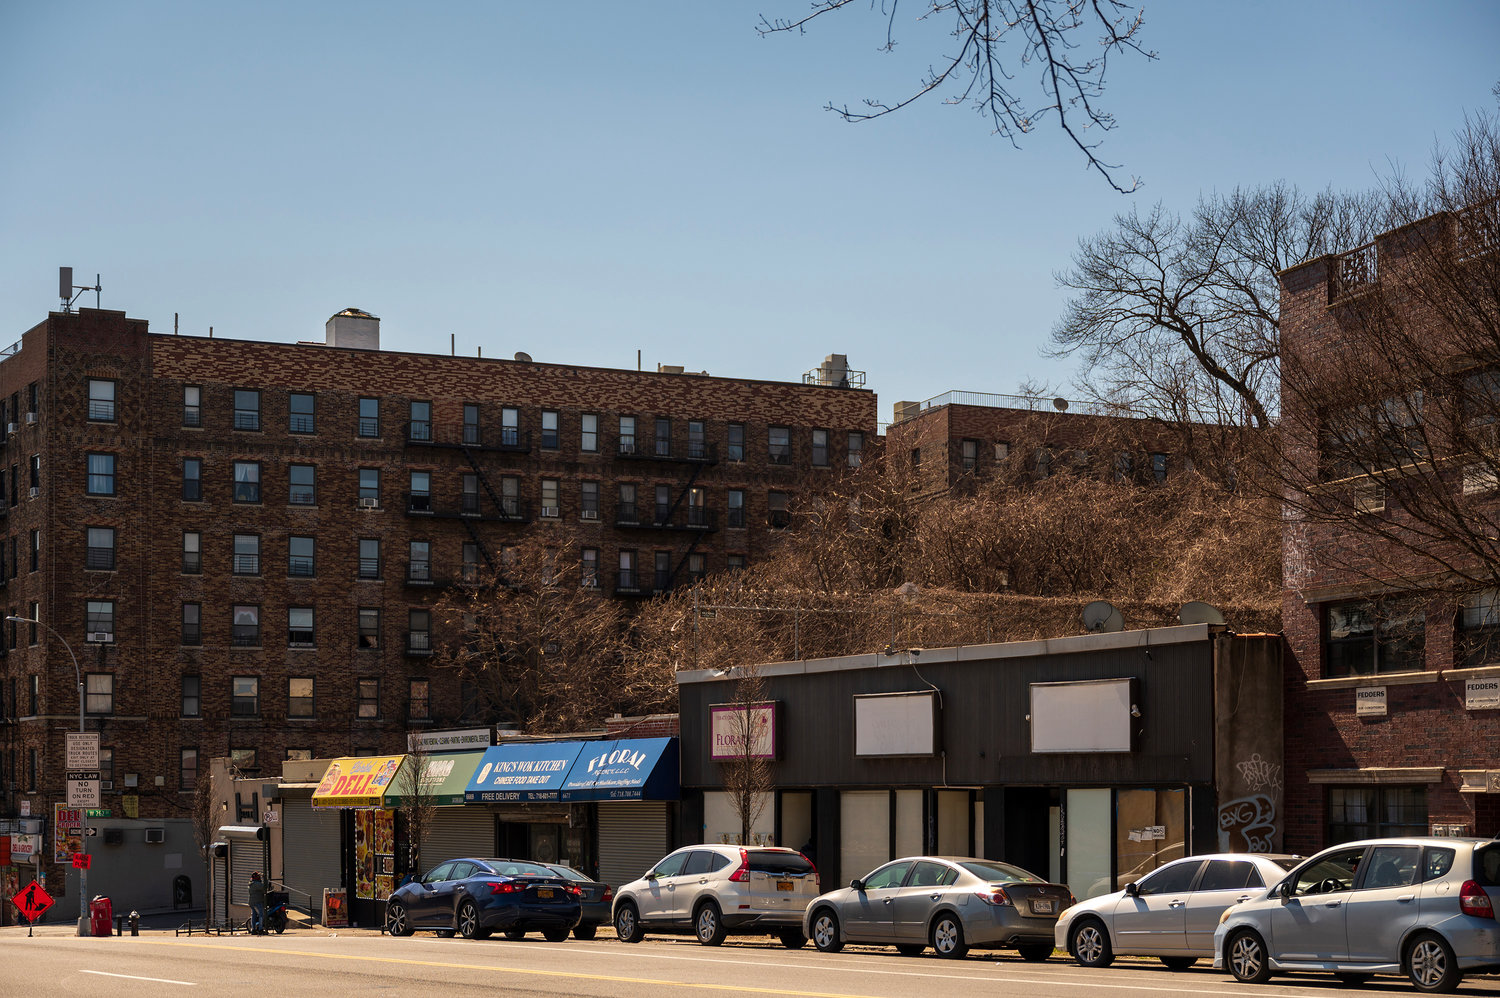 All but two businesses at 6661 Broadway have shuttered ahead of the building’s demolition to make way for the proposed homeless shelter to be built and operated by Westhab Inc. of Yonkers.